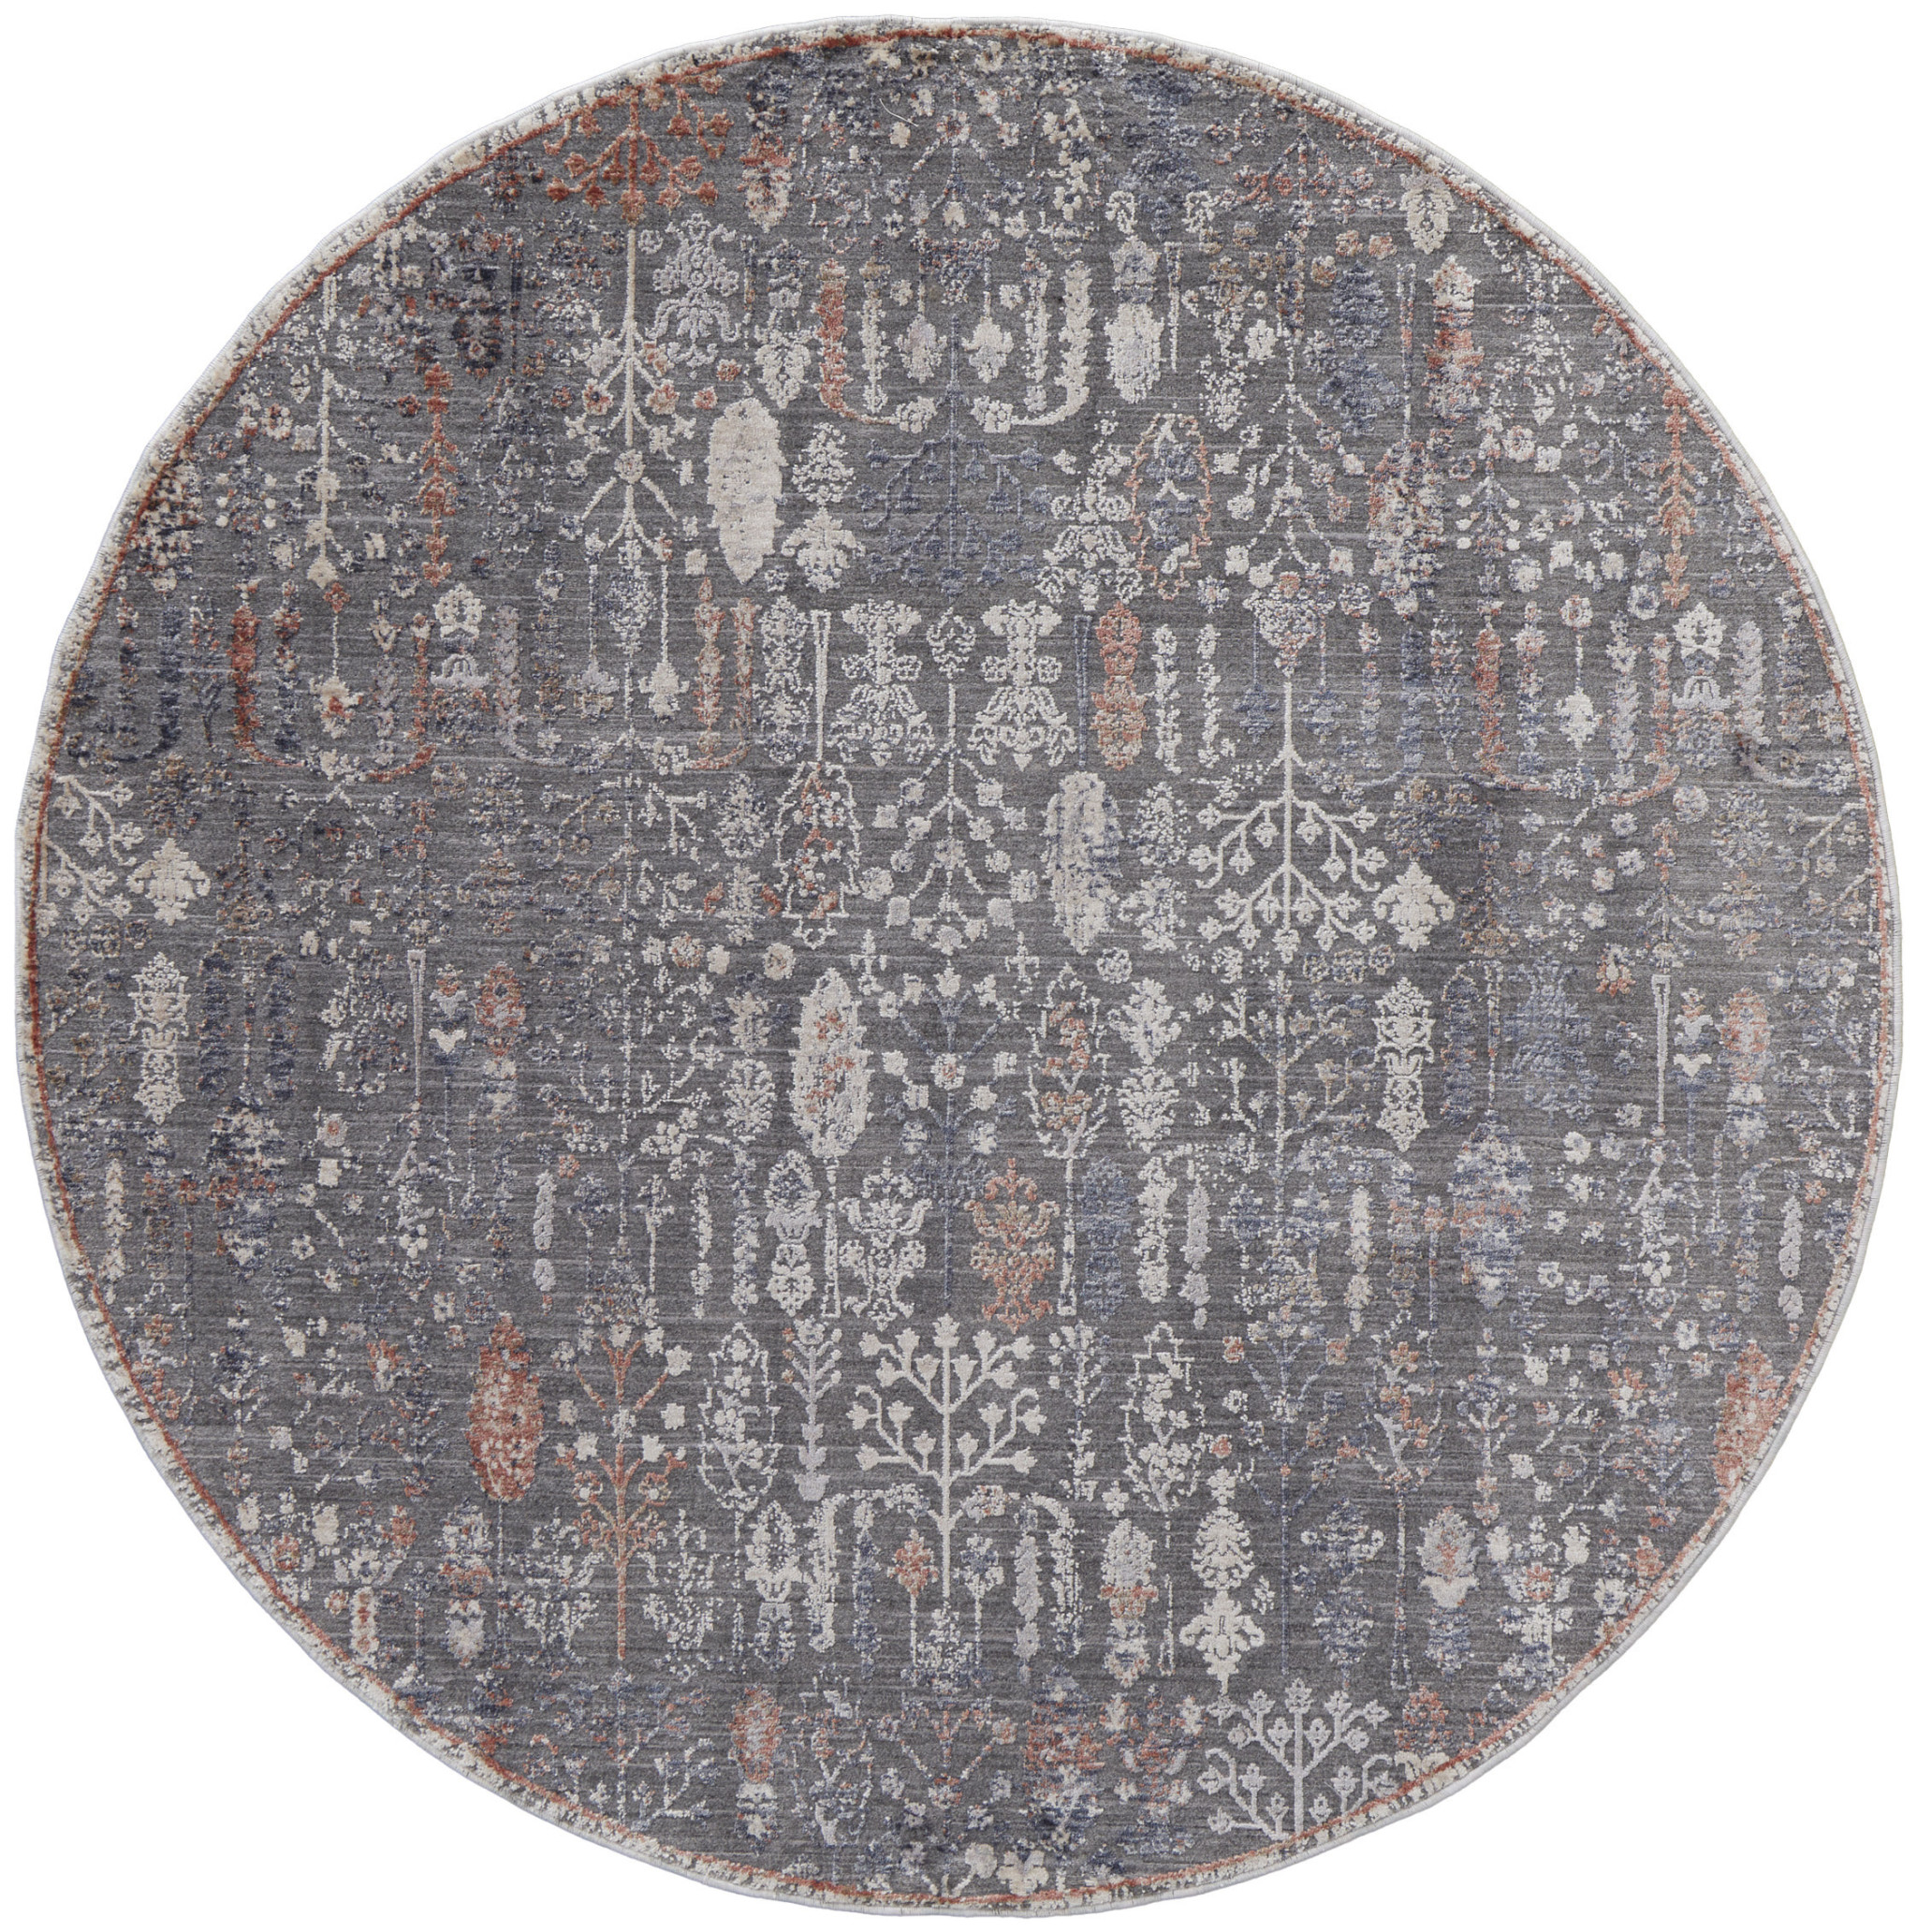 6' Gray Ivory And Orange Round Floral Power Loom Area Rug-514899-1